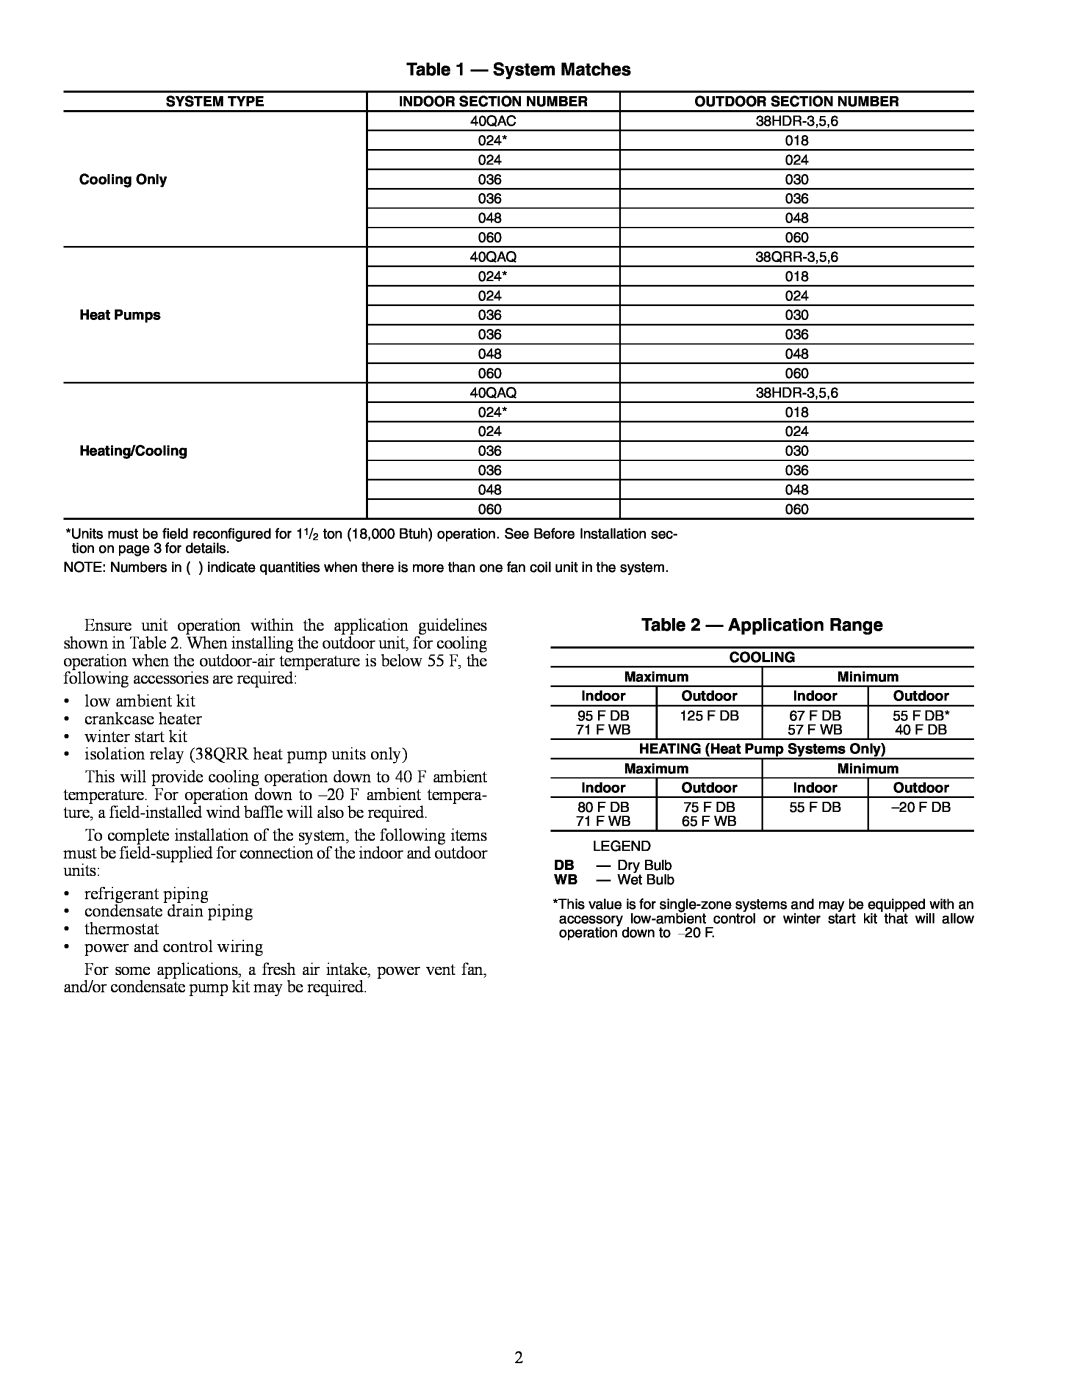 Carrier 40QA024-060 specifications System Matches, Application Range 